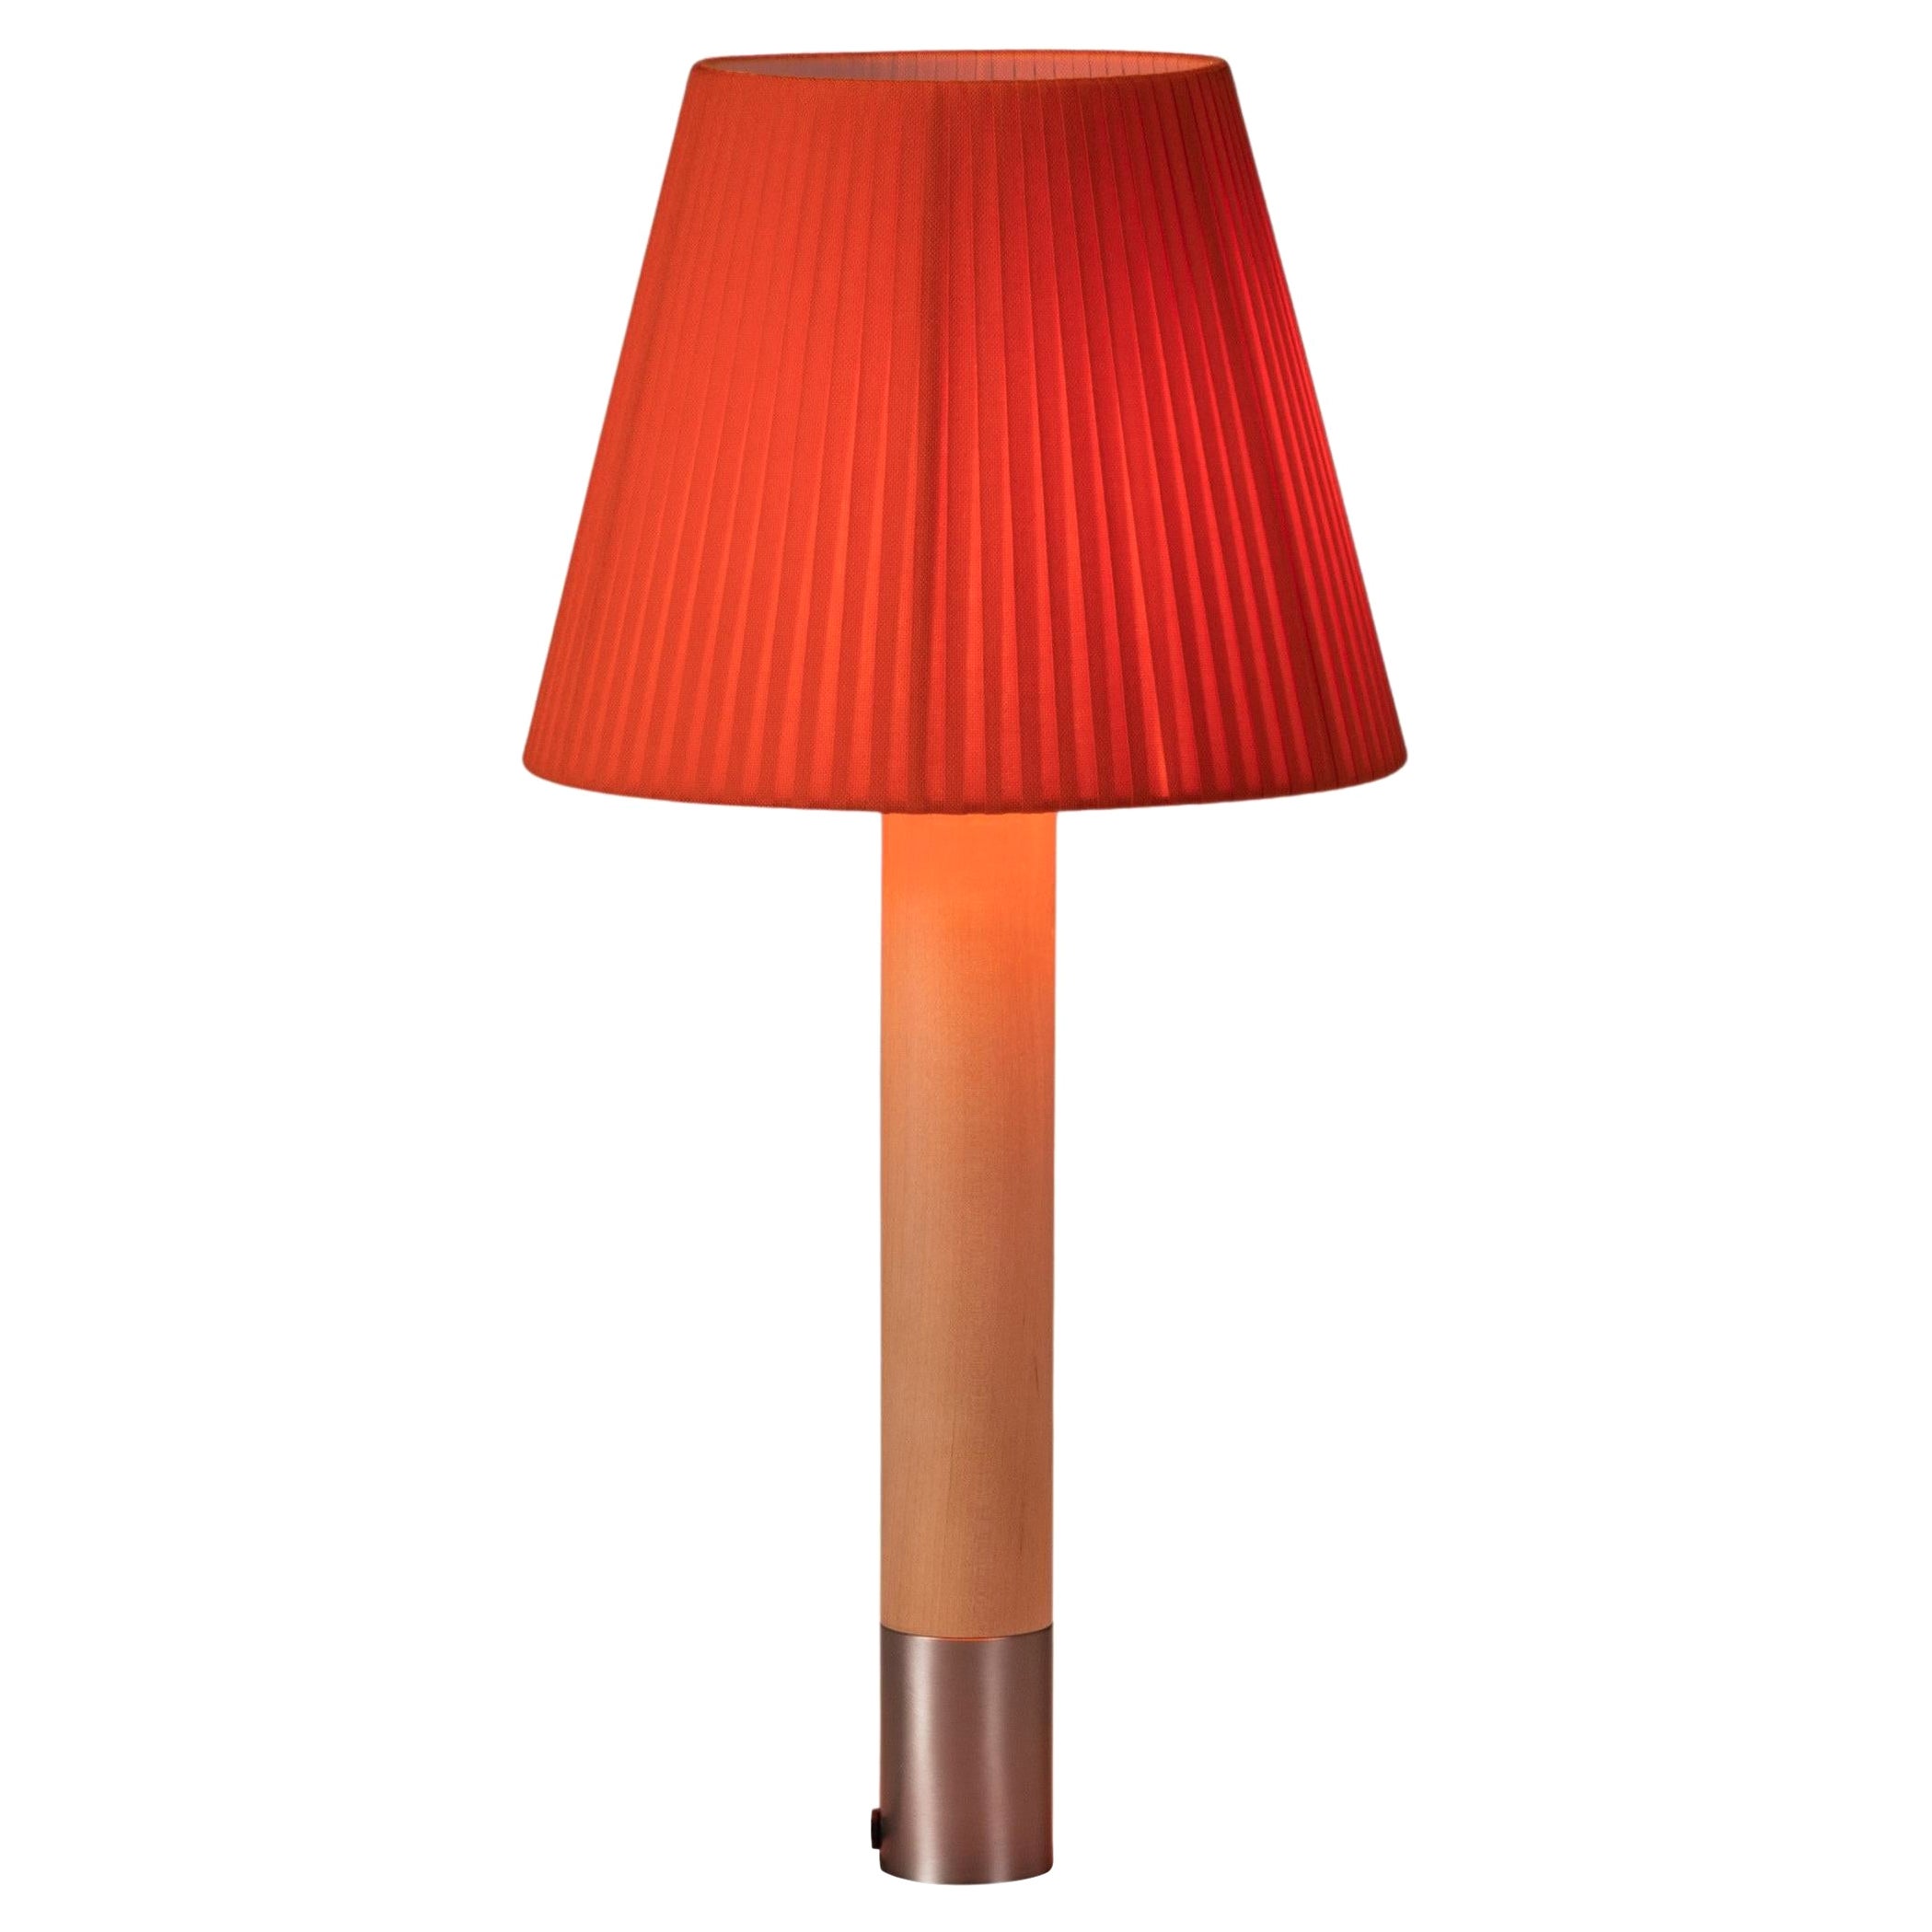 Nickel and Red Básica M1 Table Lamp by Santiago Roqueta, Santa & Cole For Sale